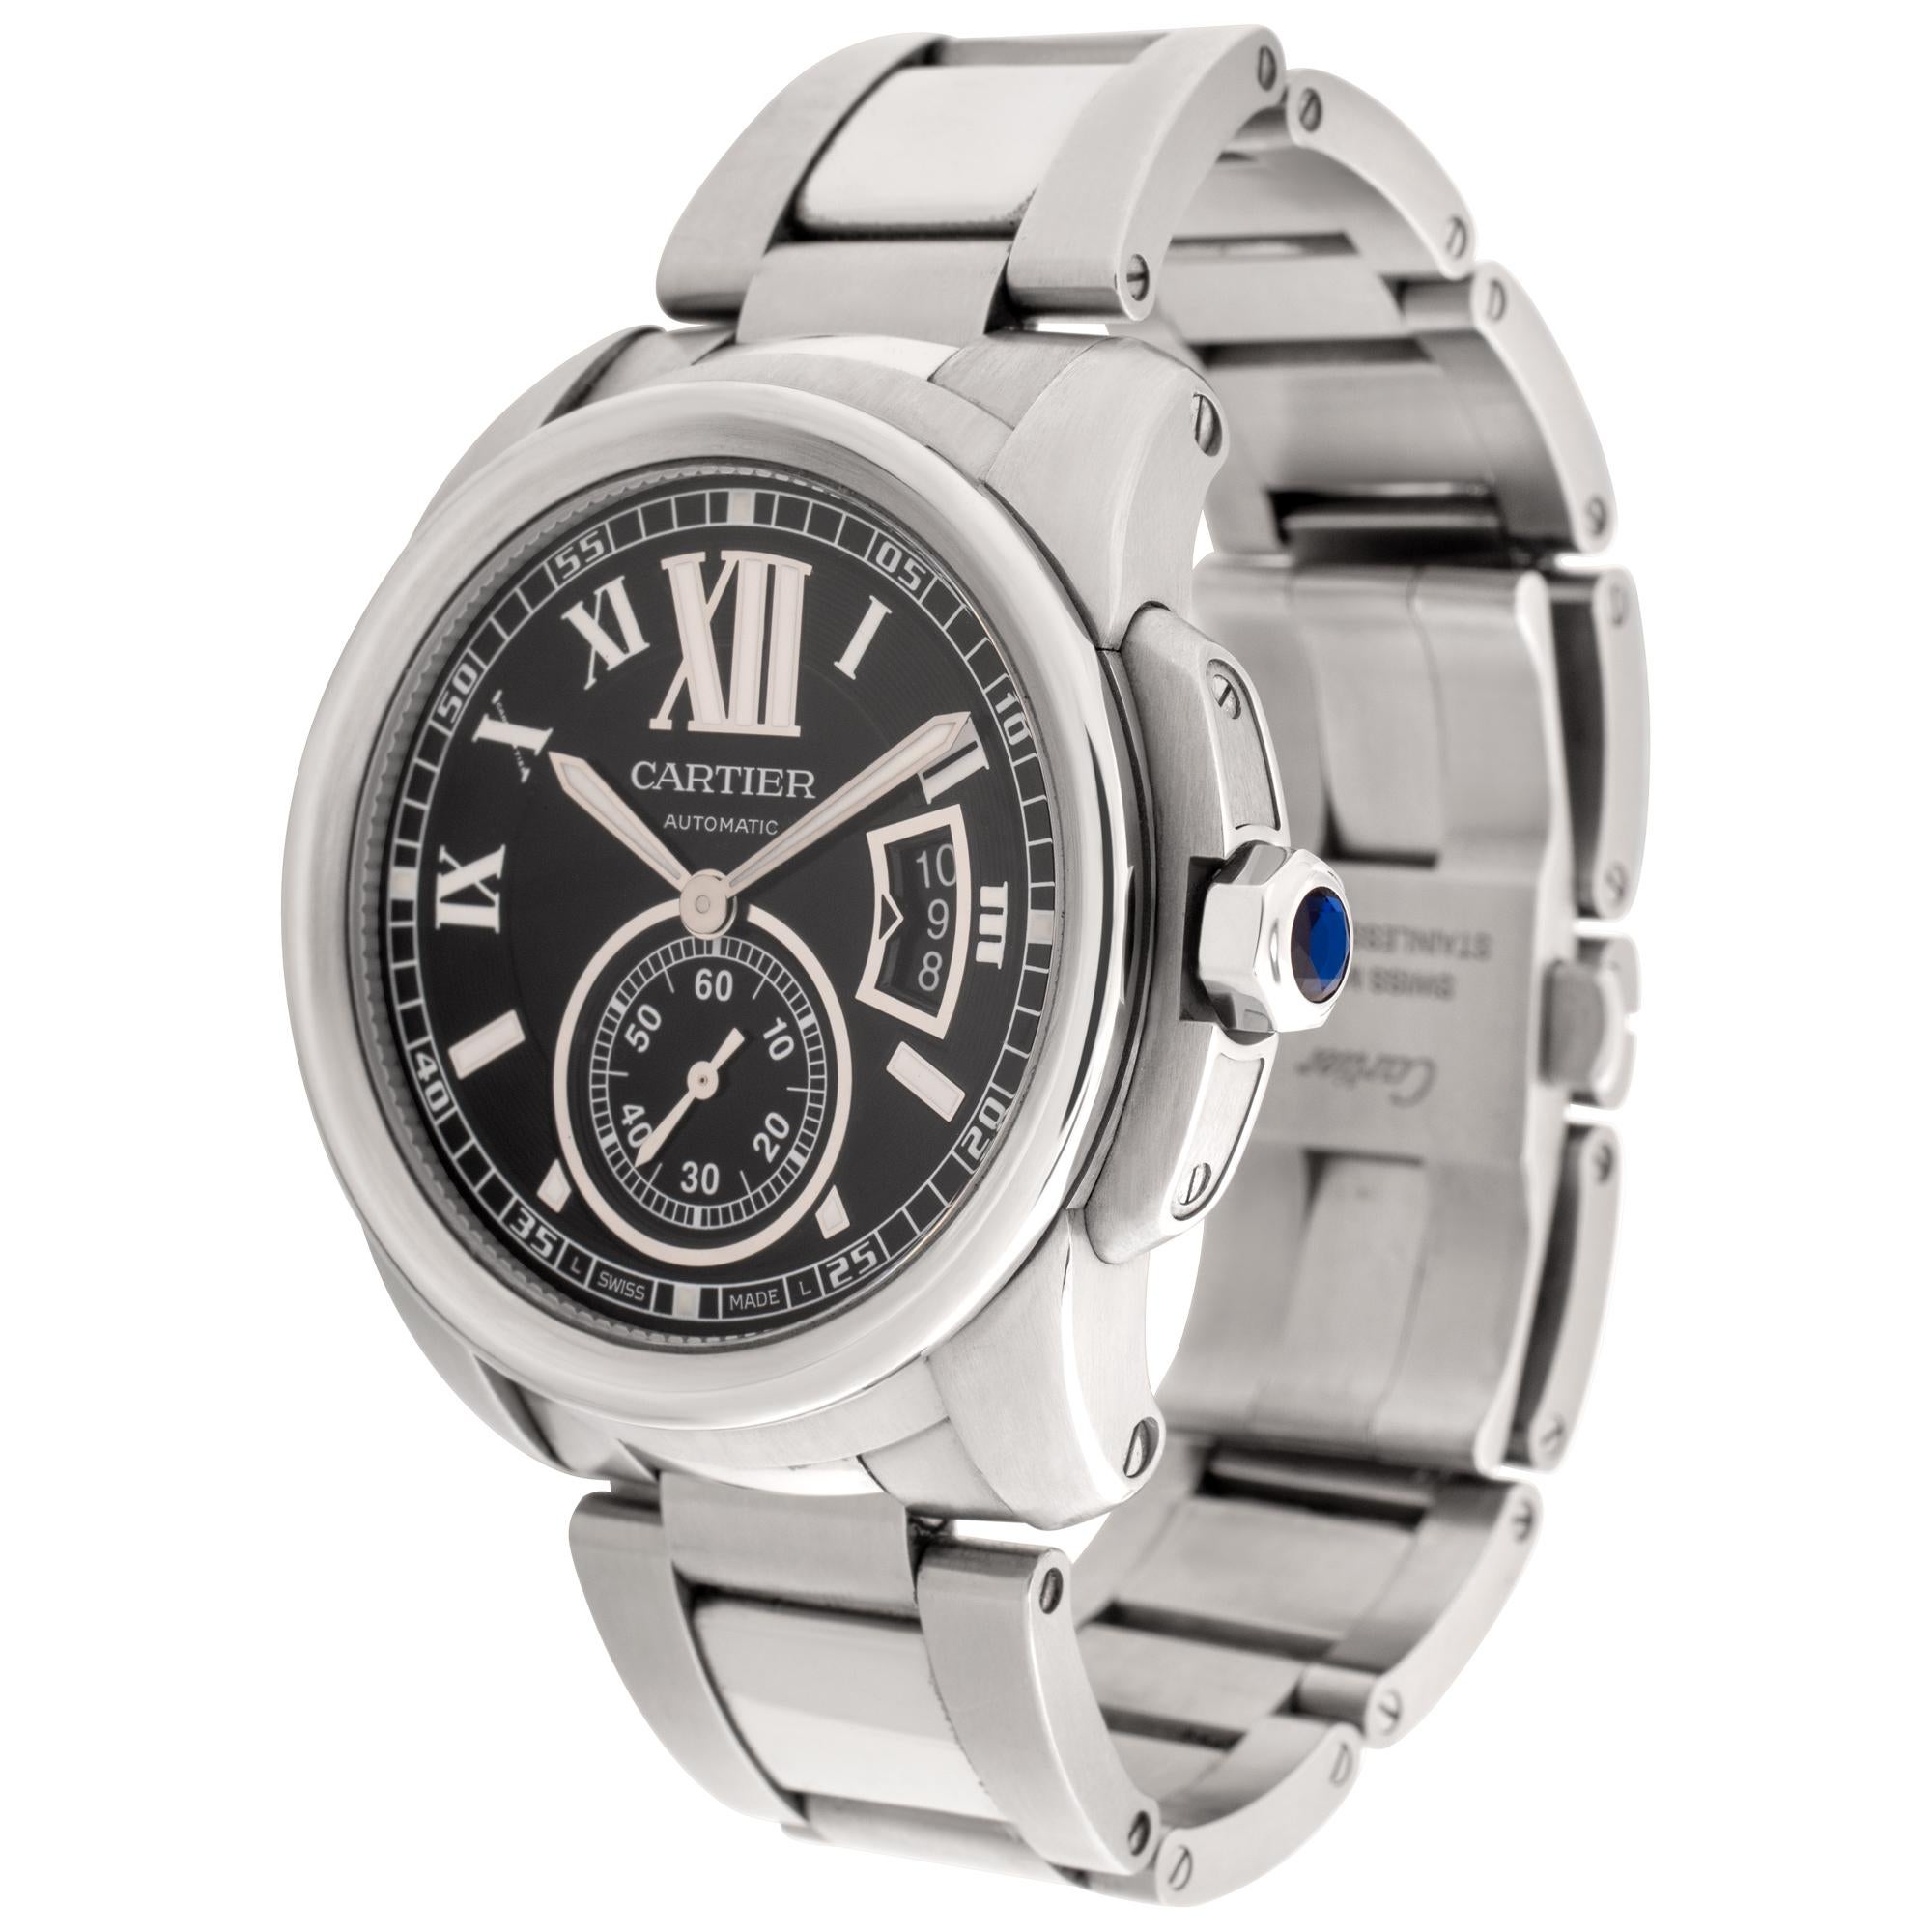 Cartier Calibre in stainless steel. Auto w/ subseconds and date. Black Roman Numeral Dial. 42 mm case size. Ref W7100016. Fine Pre-owned Cartier Watch. Certified preowned Sport Cartier Calibre W7100016 watch is made out of Stainless steel on a